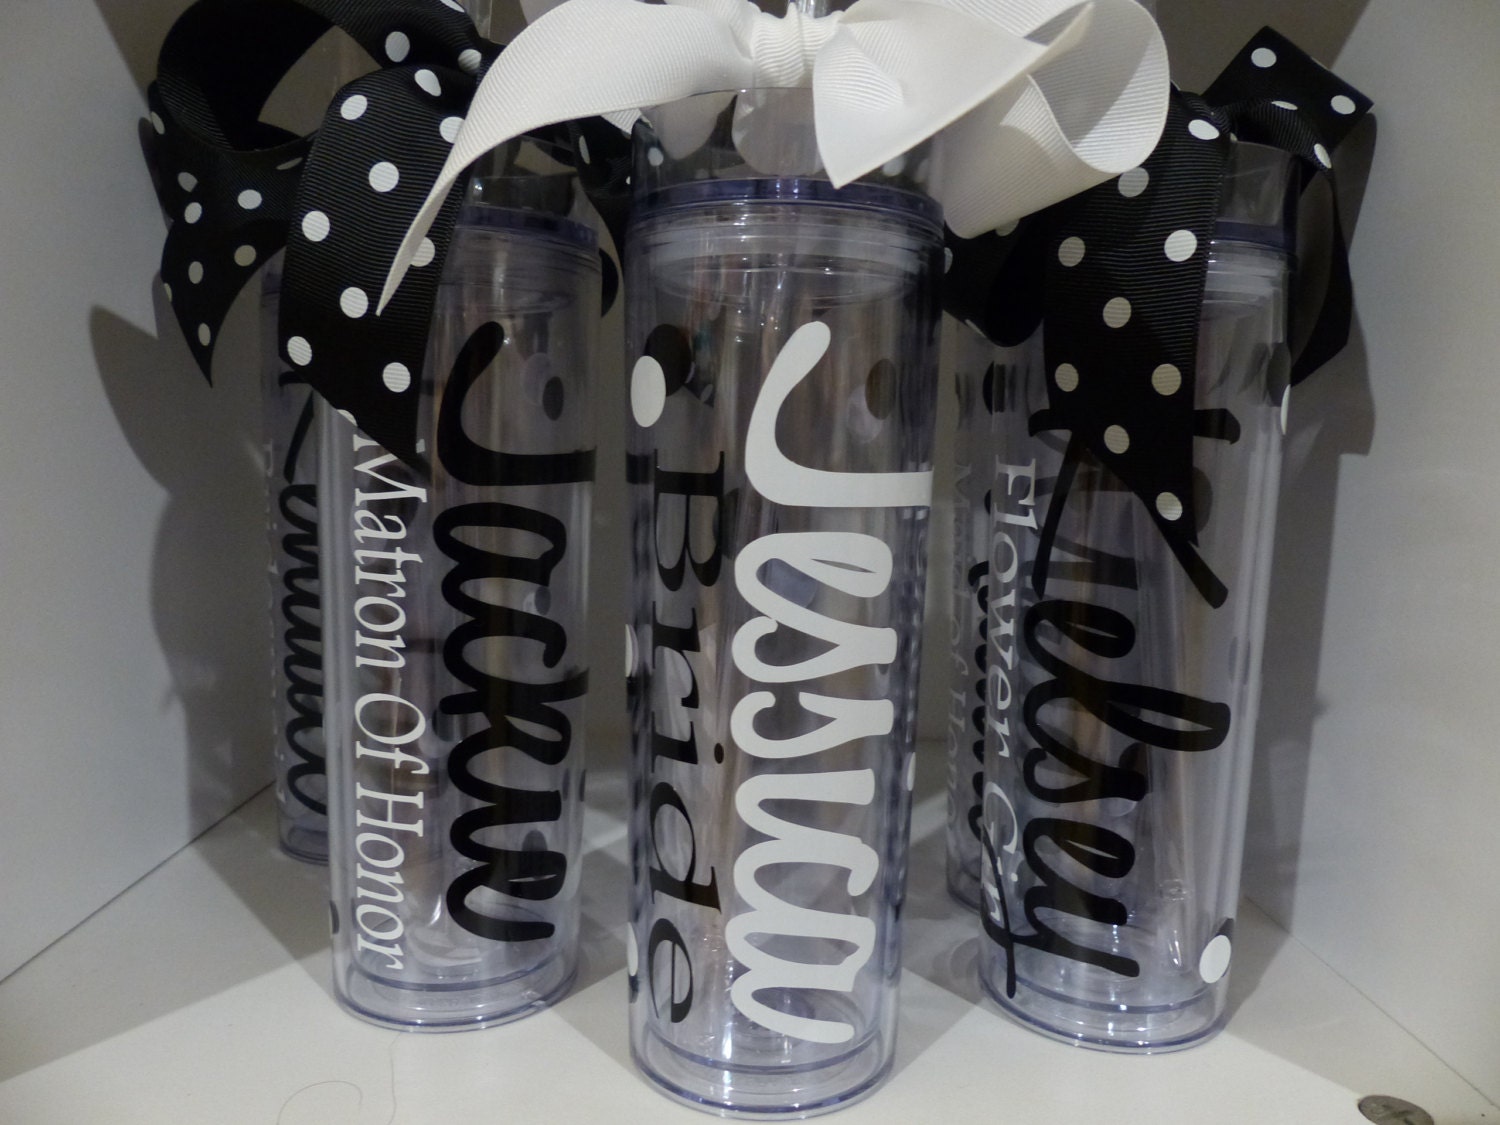 Wedding Tumblers -  Personalized Wedding Tumblers, Bride, Bridesmaid gifts,  Groom, wedding day, mother of the bride, mother of the groom